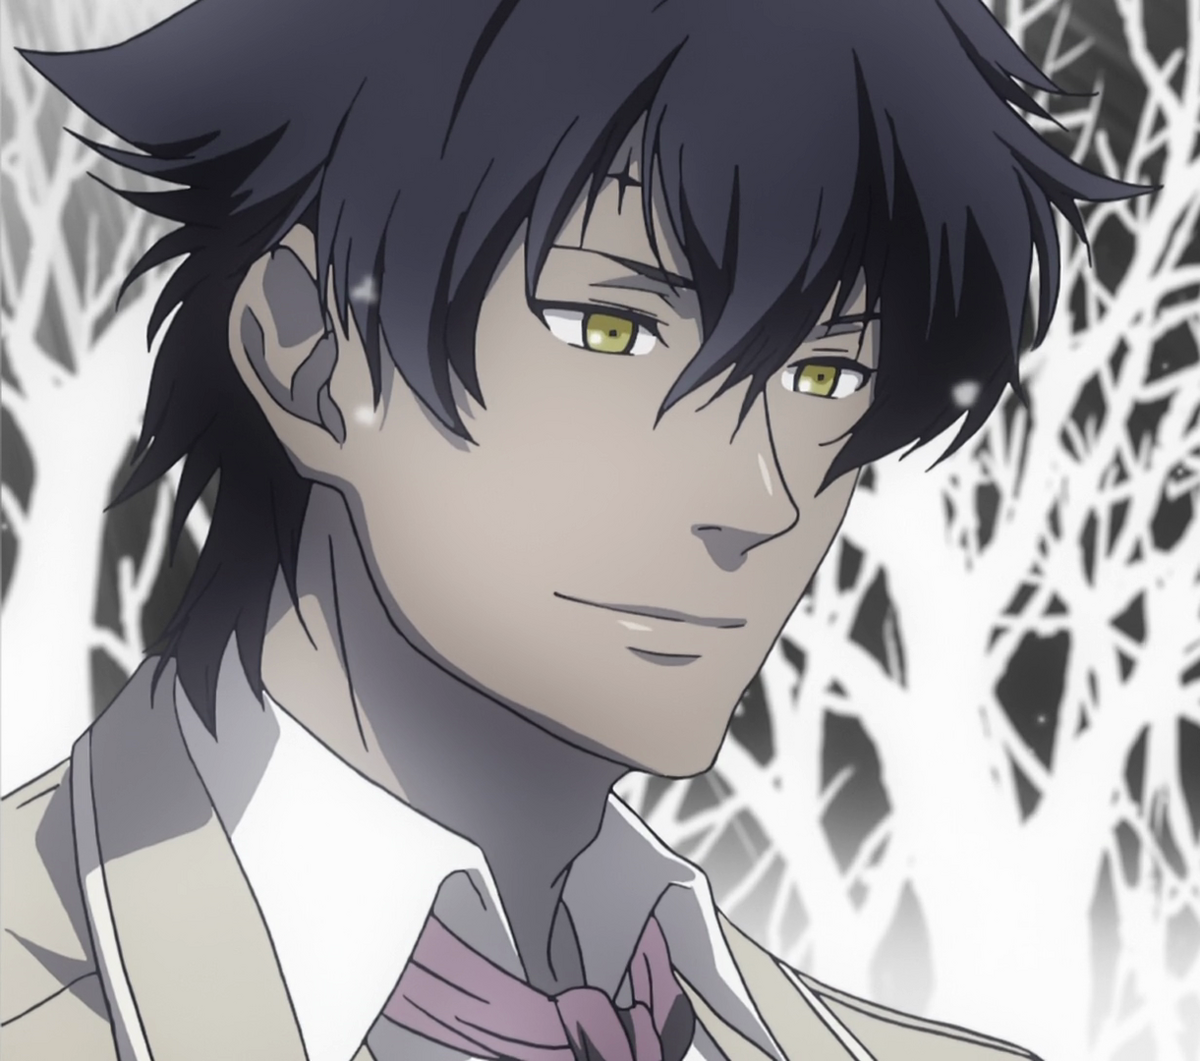 D.Gray-Man, Anime Voice-Over Wiki